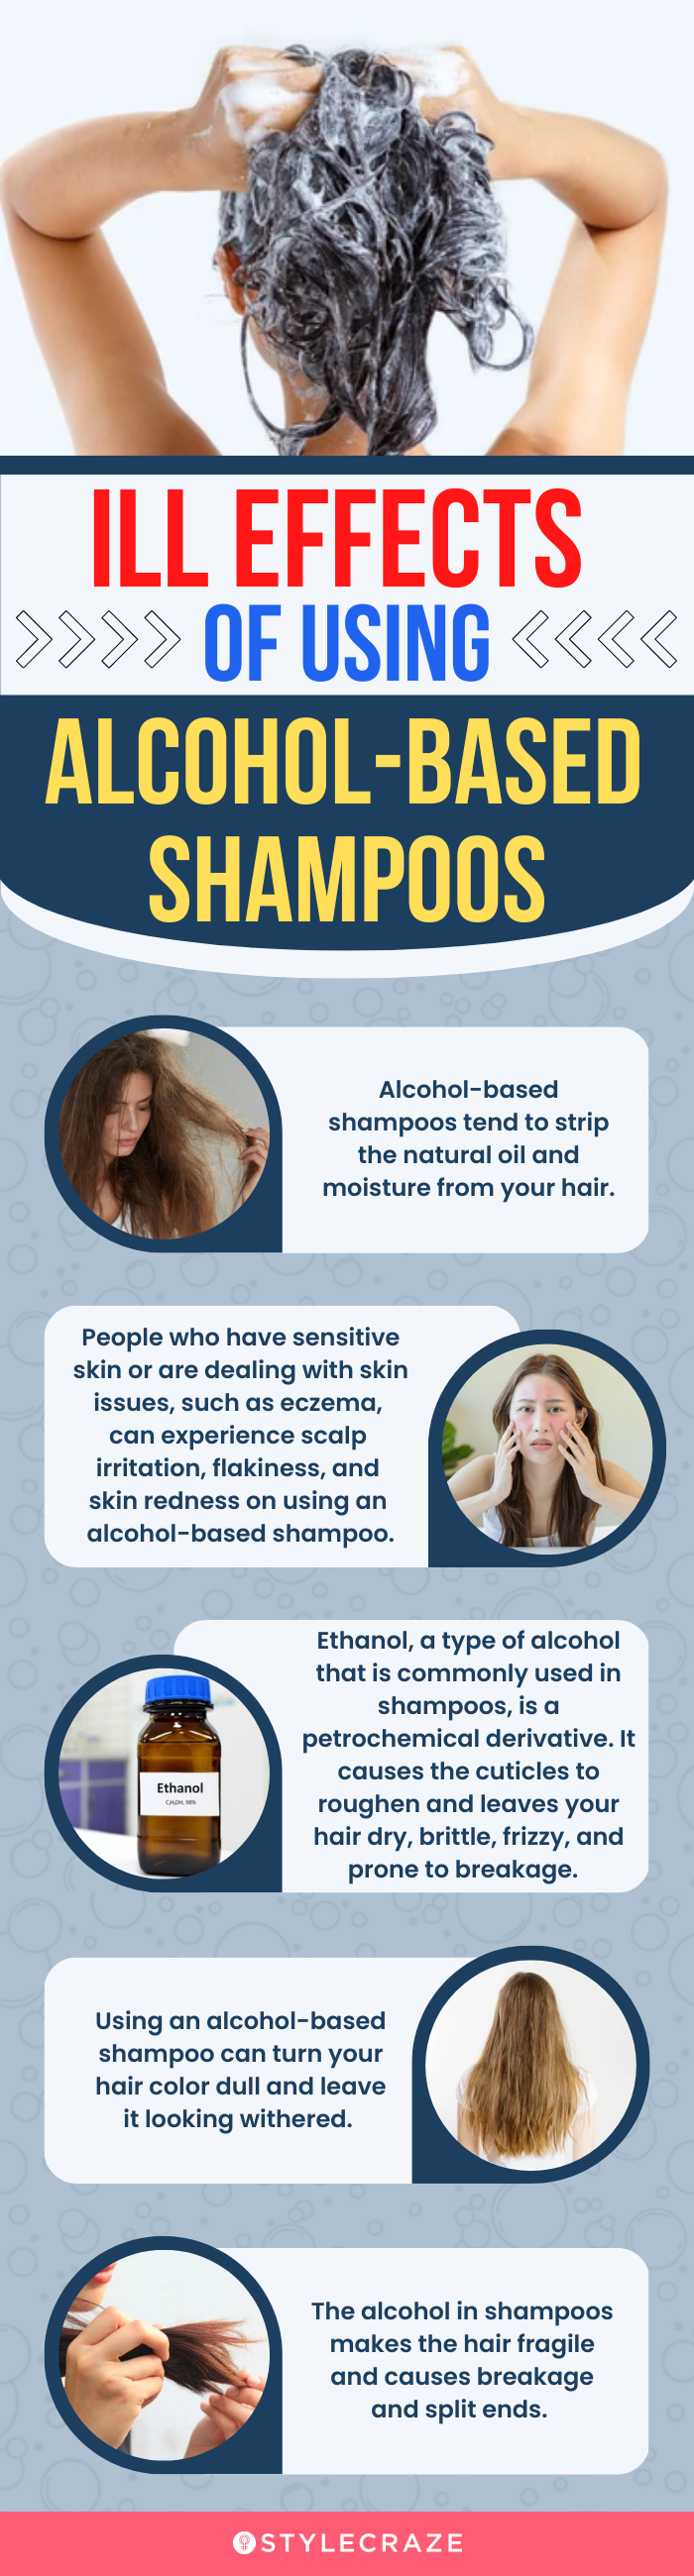 Ill-Effects of Using Alcohol-Based Shampoos (infographic)